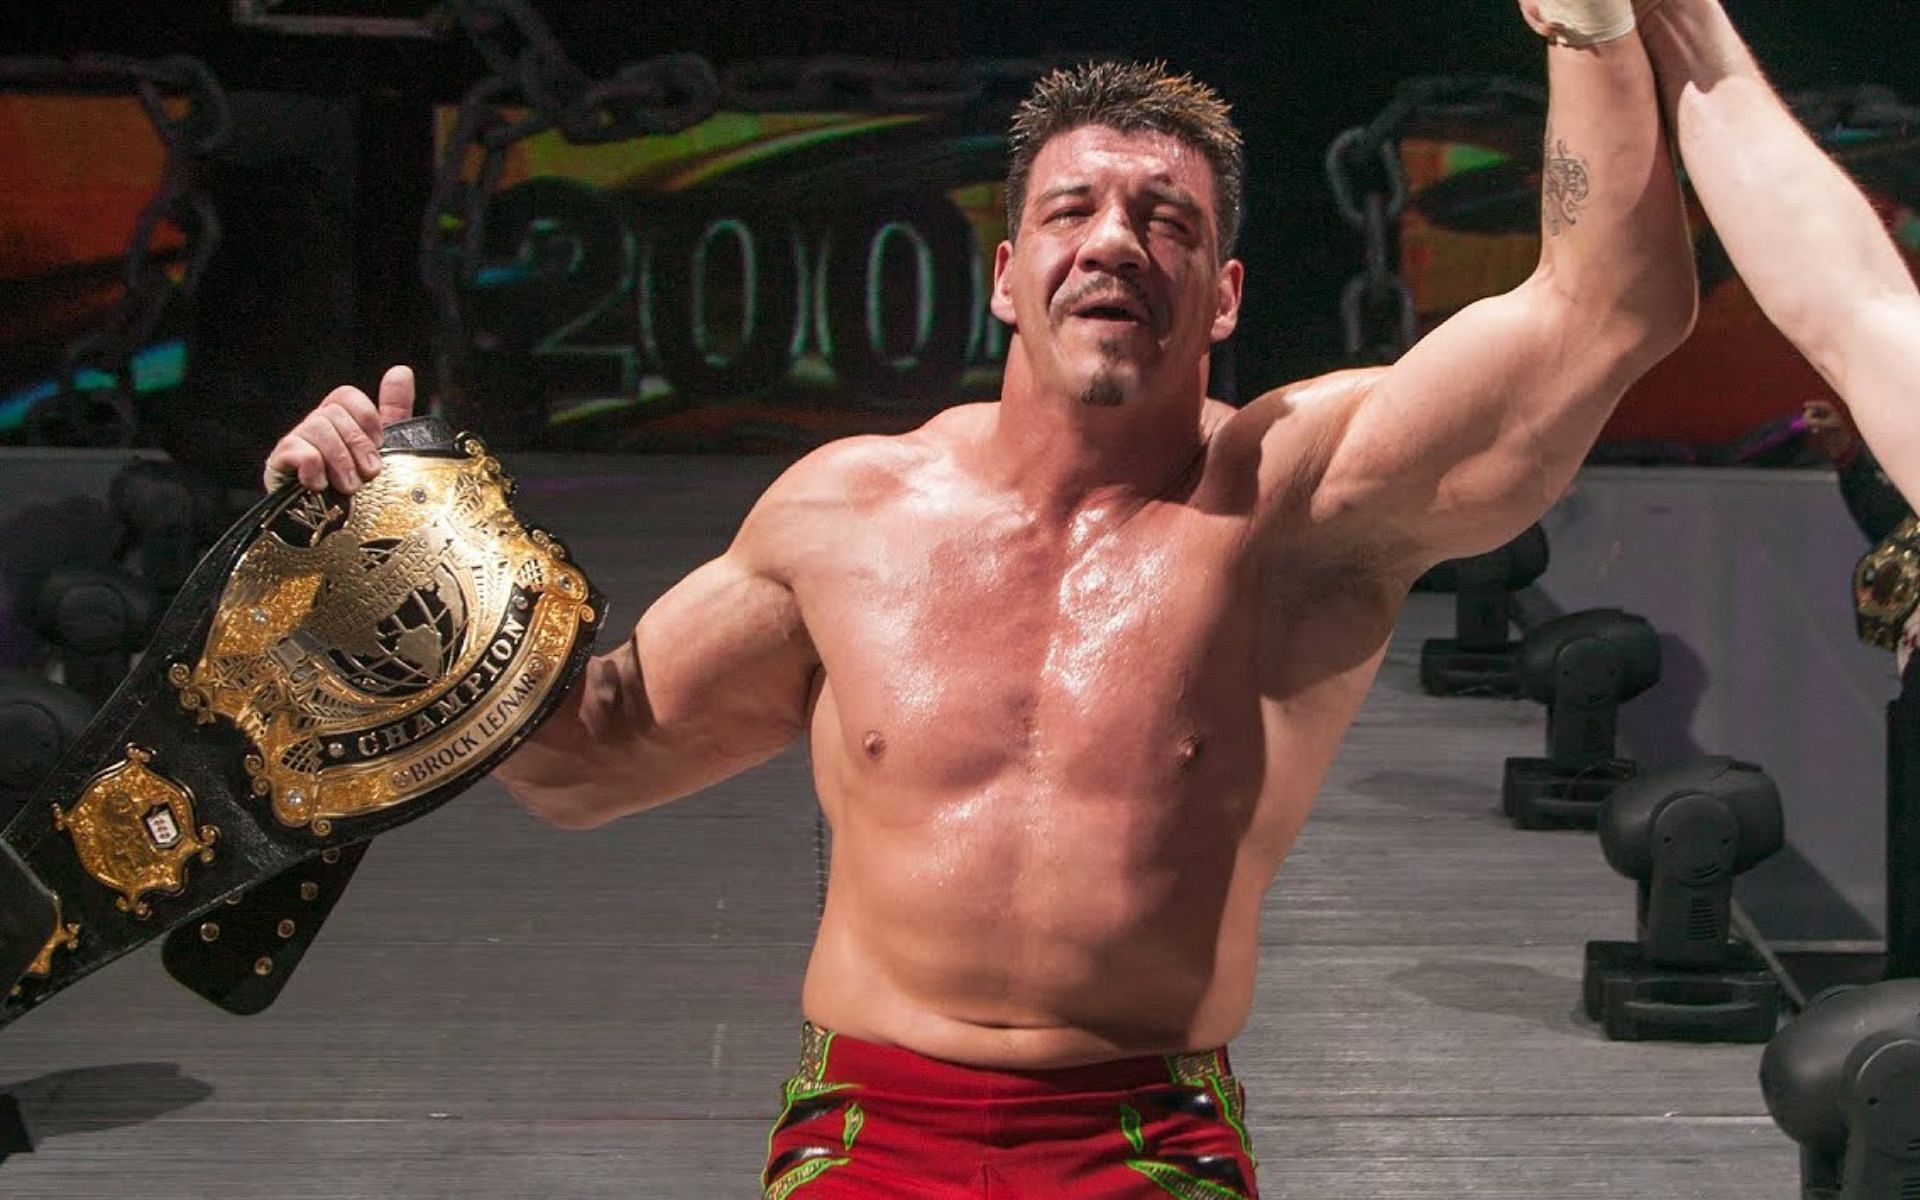 Eddie Guererro defeated Brock Lesnar to win the WWE title!